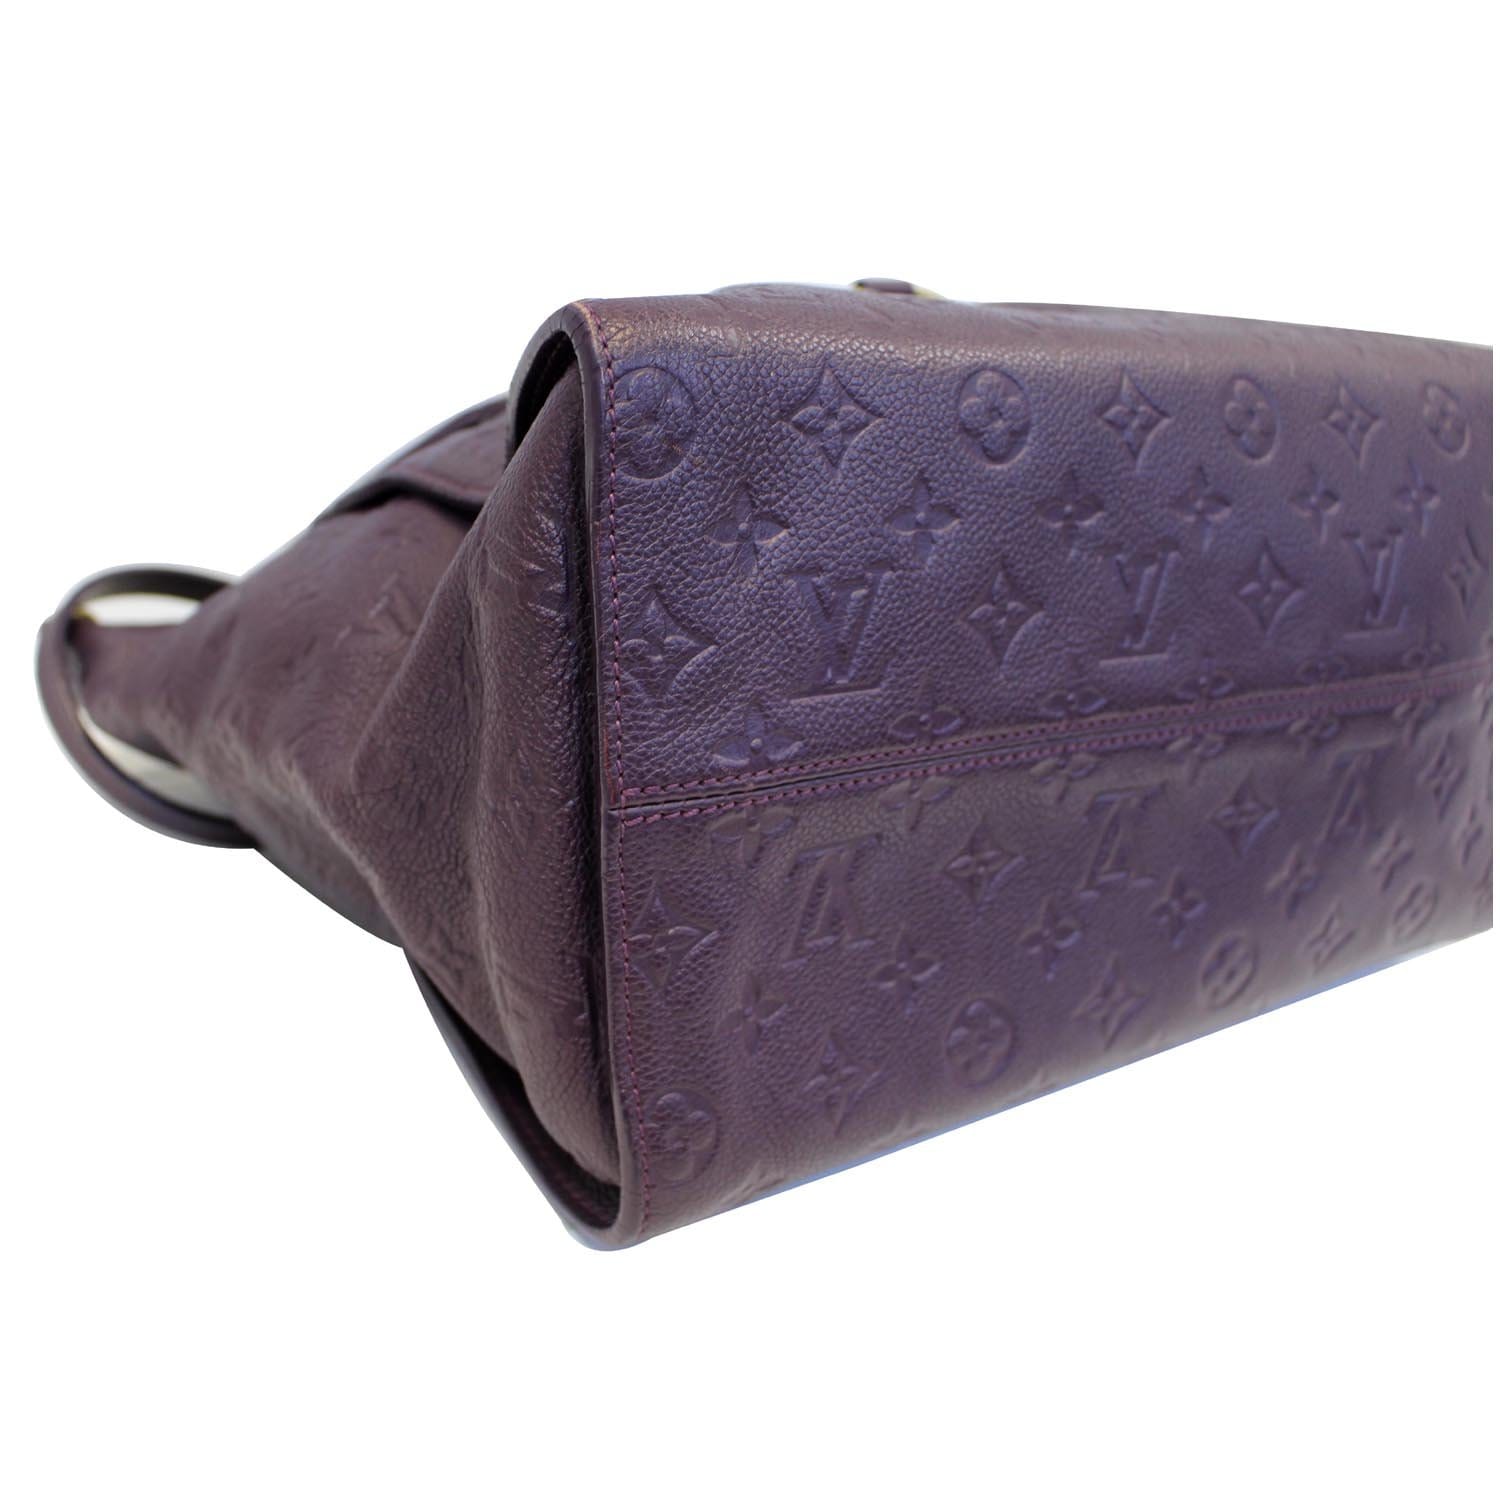 Cosmetic Pouch PM Monogram Empreinte Leather - Travel